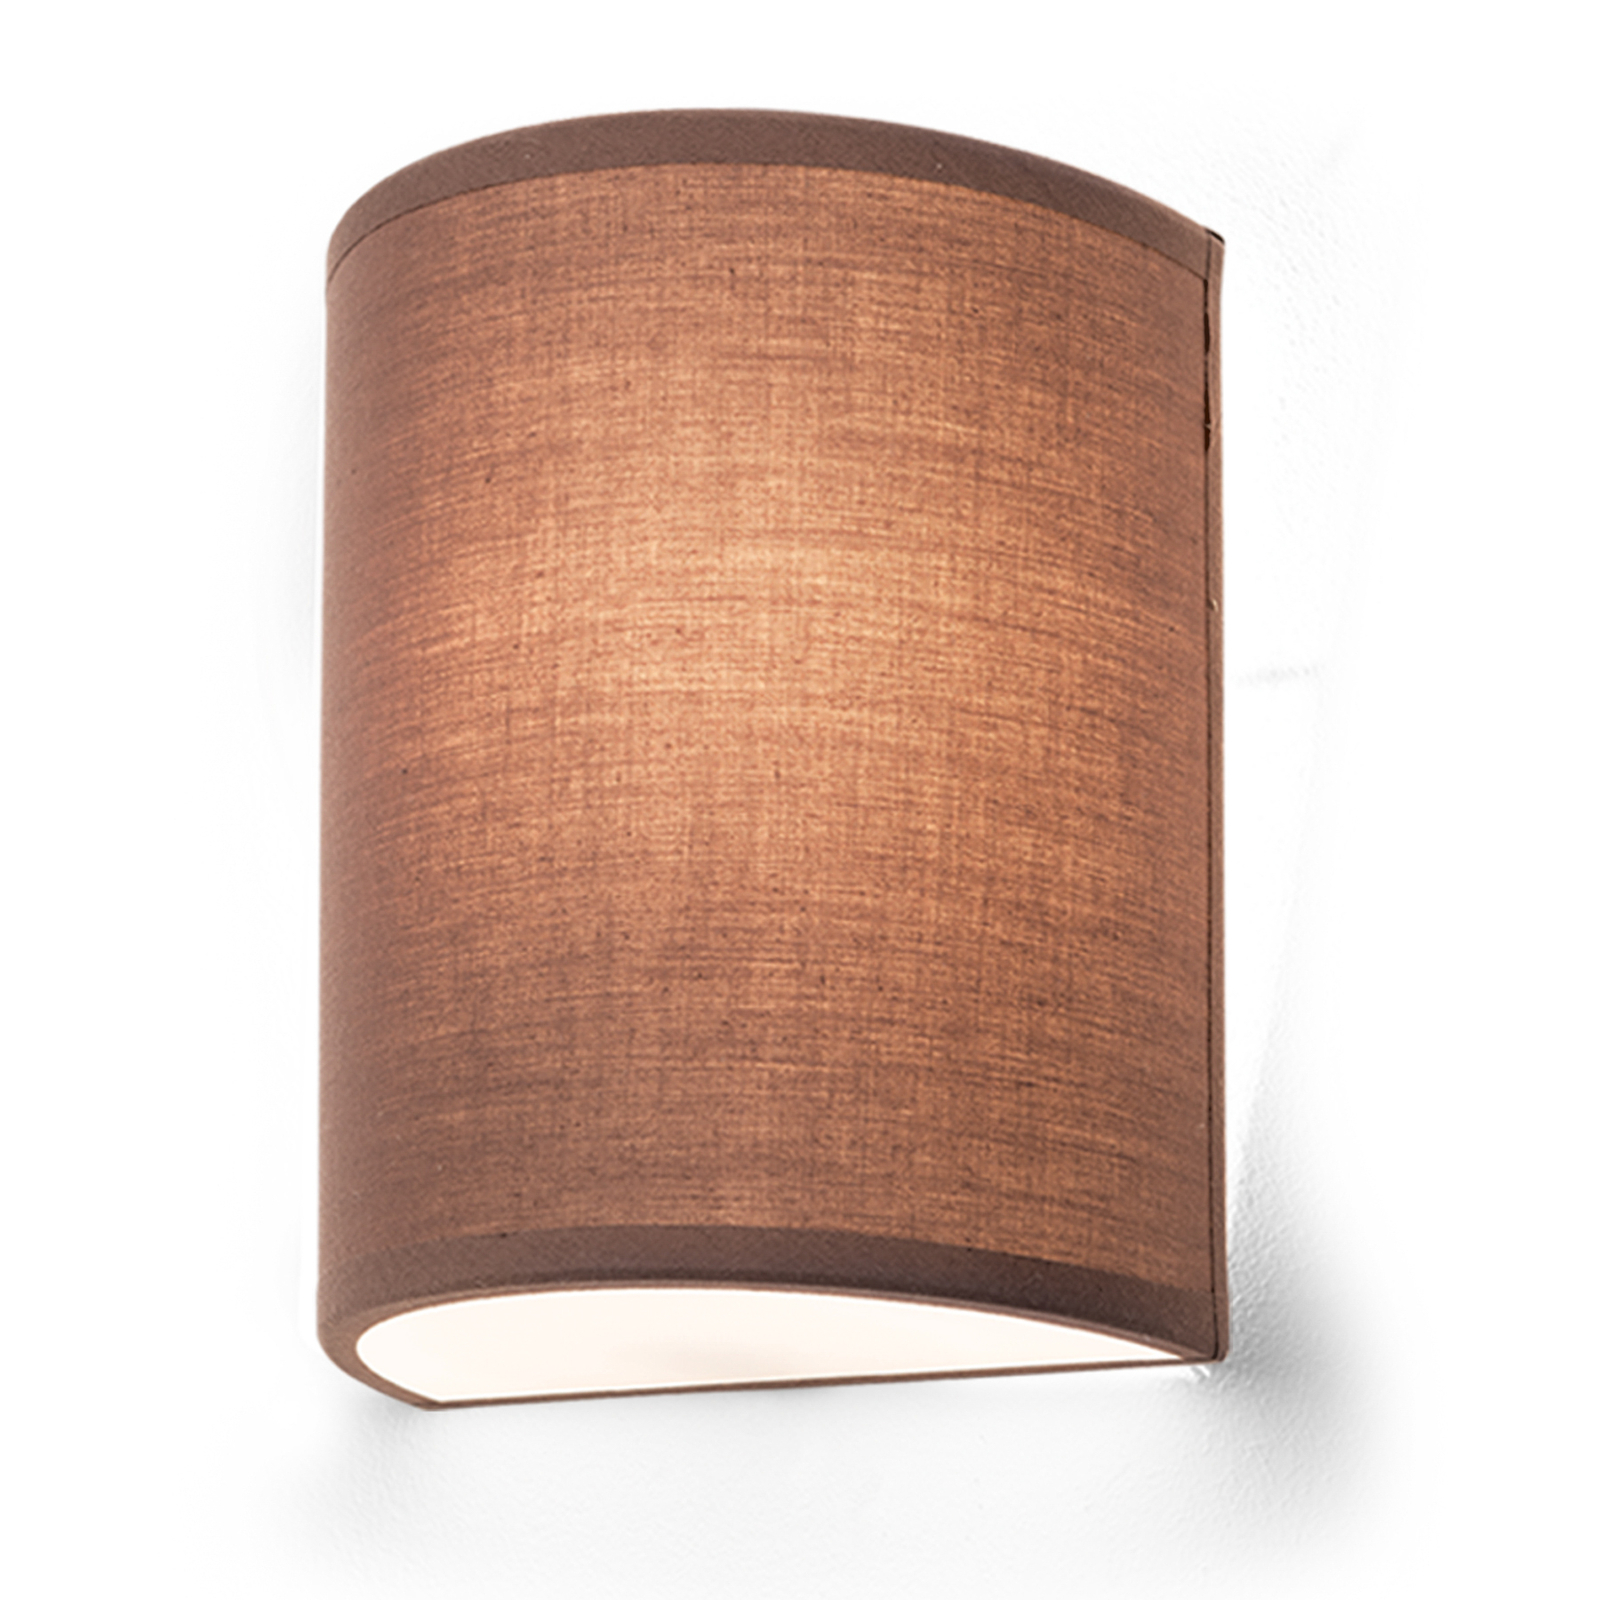 Ufo wall light with a linen lampshade, brown